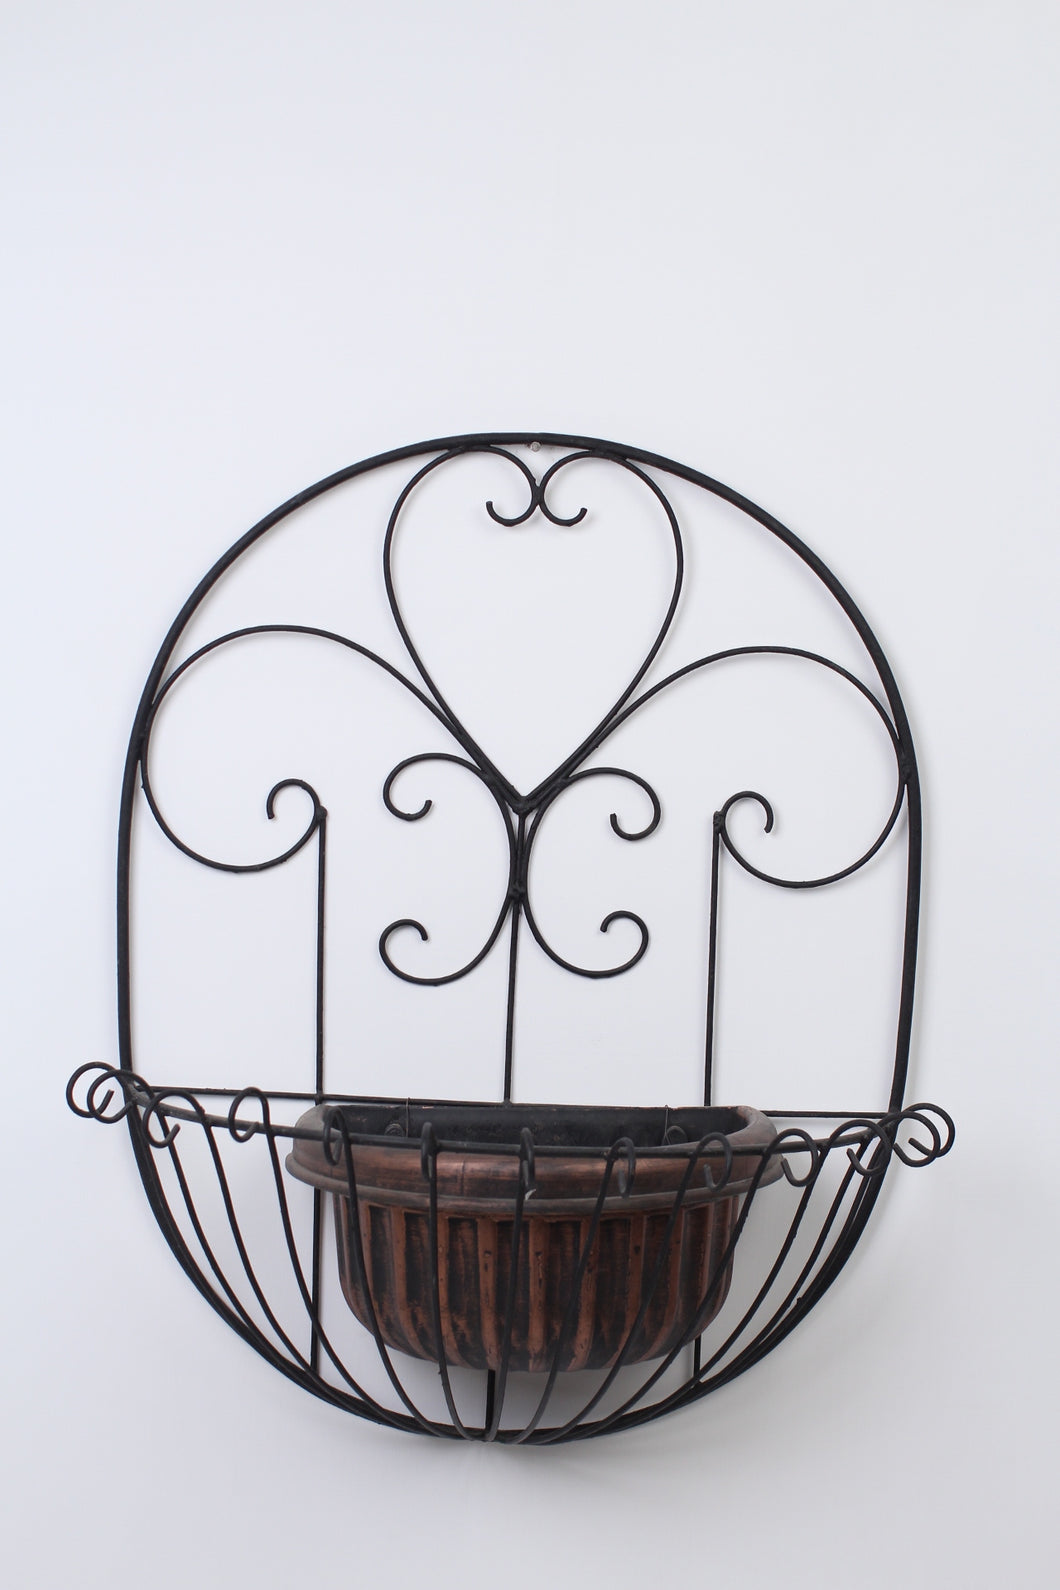 Black & Brown Metal Wall Hanging Planter Basket with Coco Liner 18